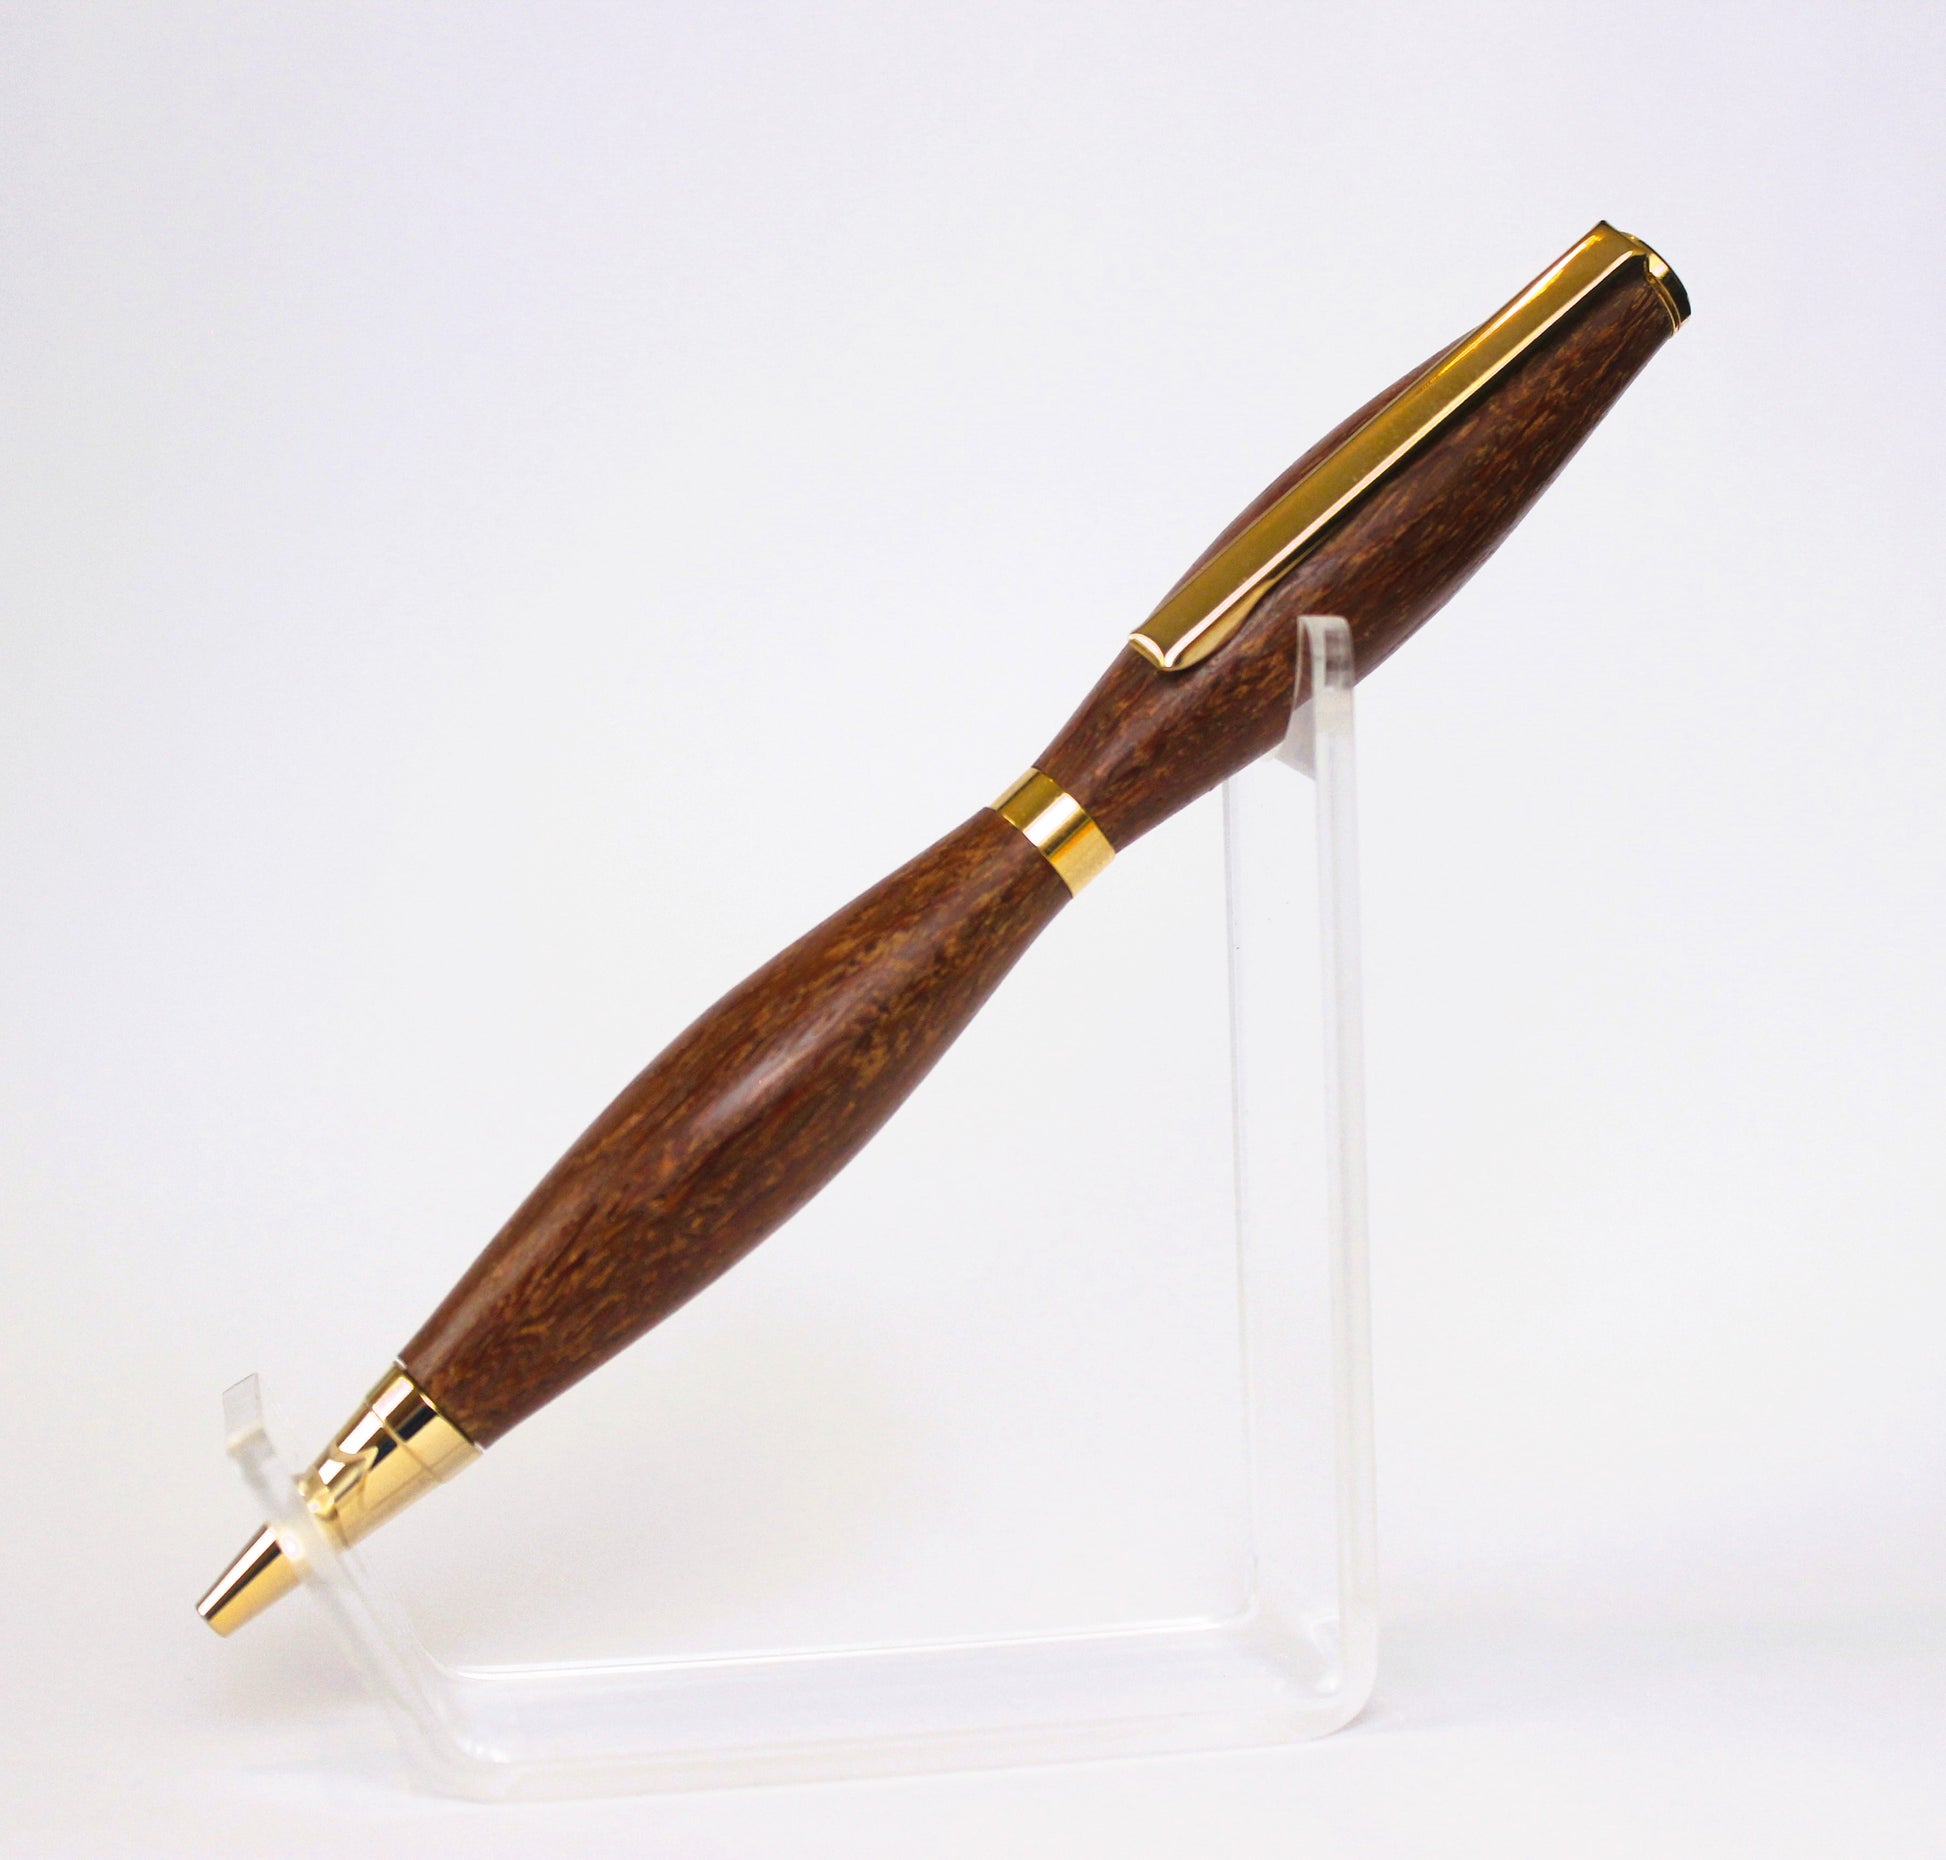 Twist Ballpoint Pen Gold and Lace Wood-Home Office > Office Supplies > Office Instruments > Writing & Drawing Instruments > Pens & Pencils-Quinn's Mercantile